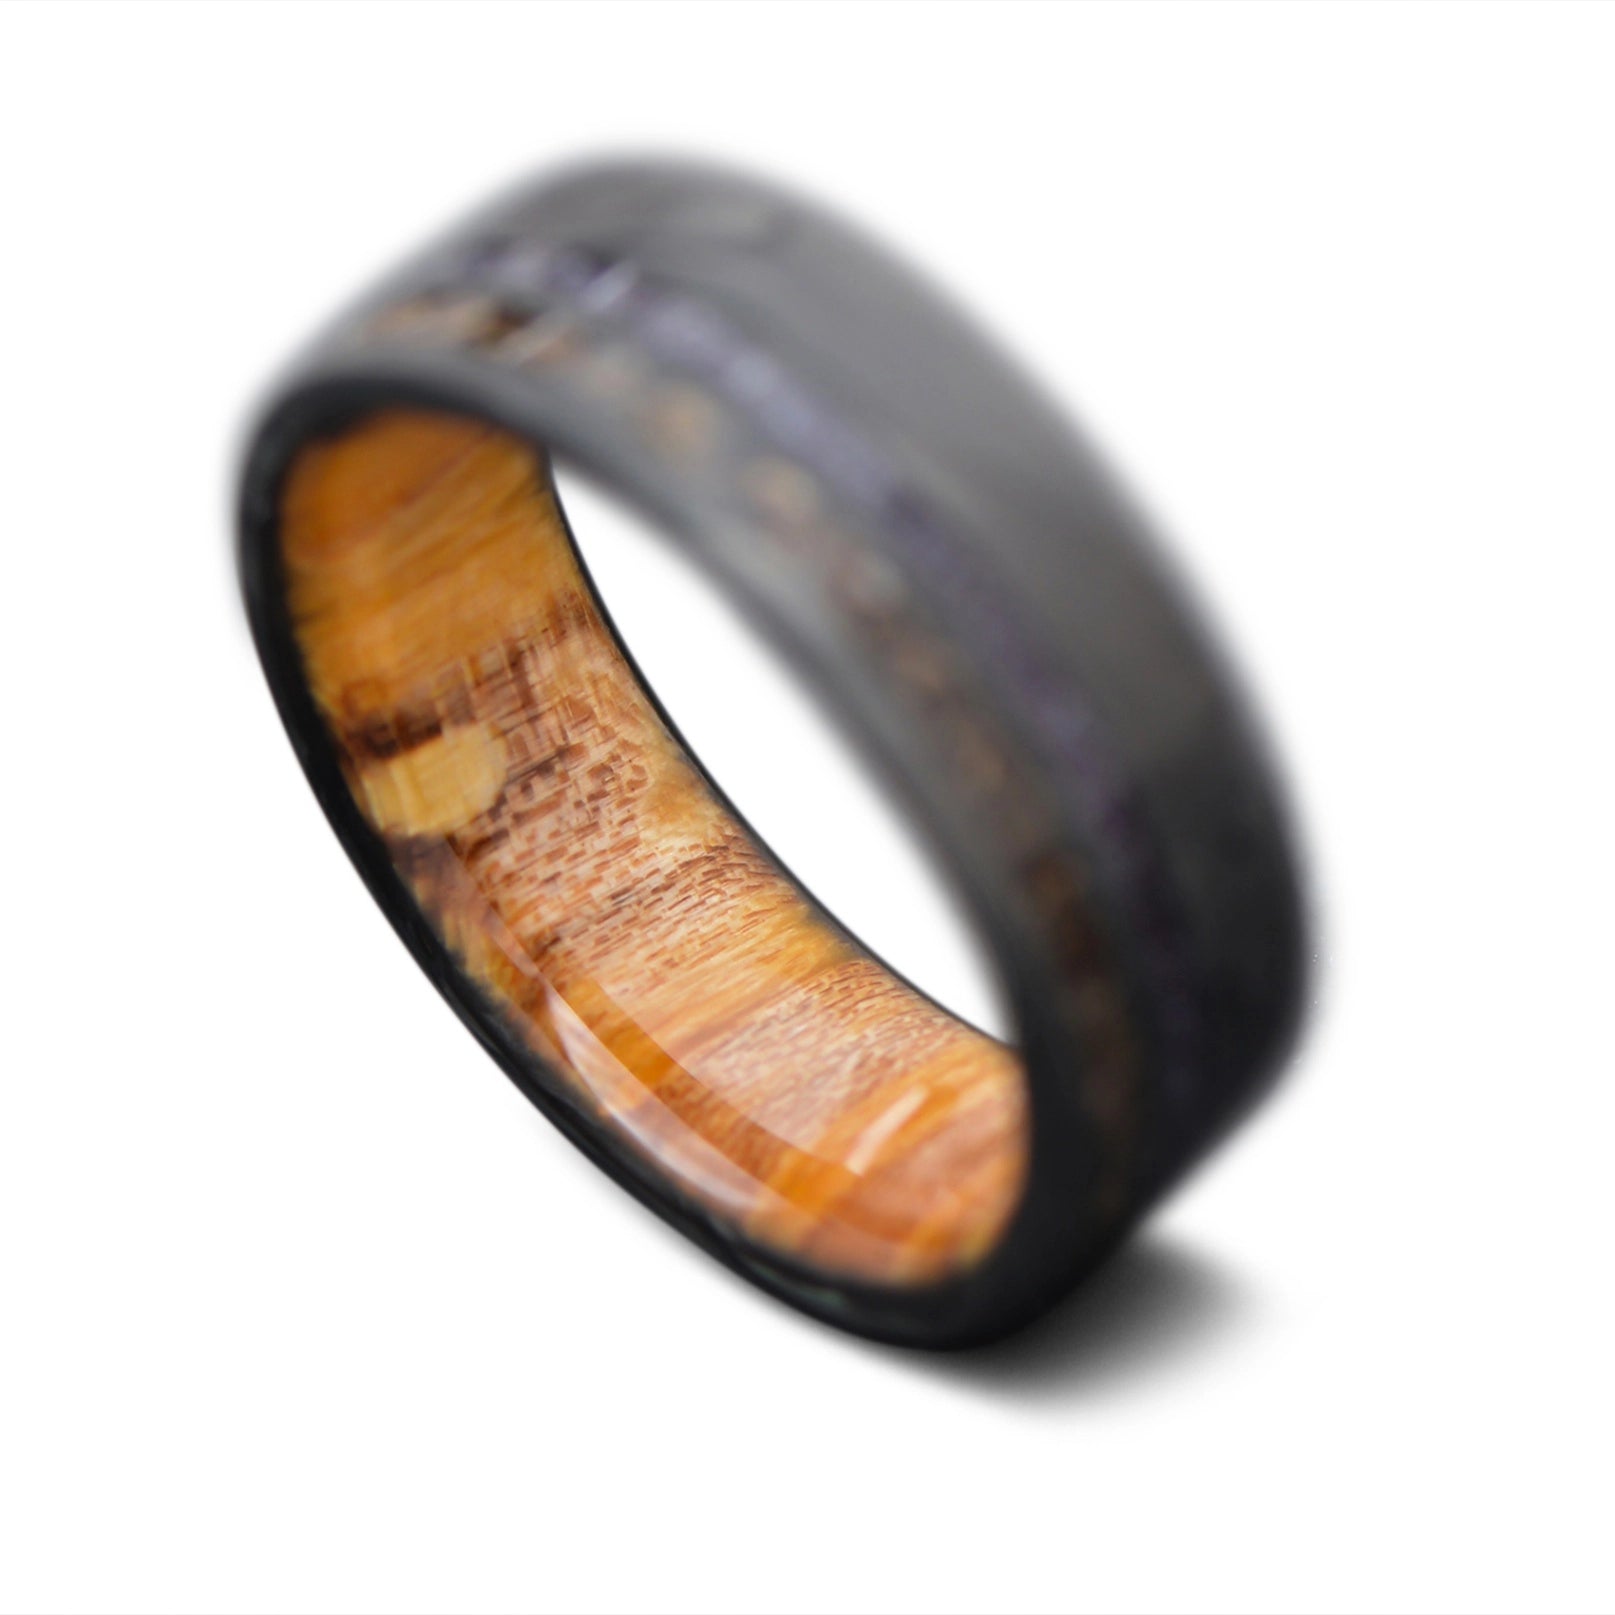 Forged Carbon Ring with TRex and Purple Amethyst  and silver birch wood inner sleeve| Men's Wedding Band